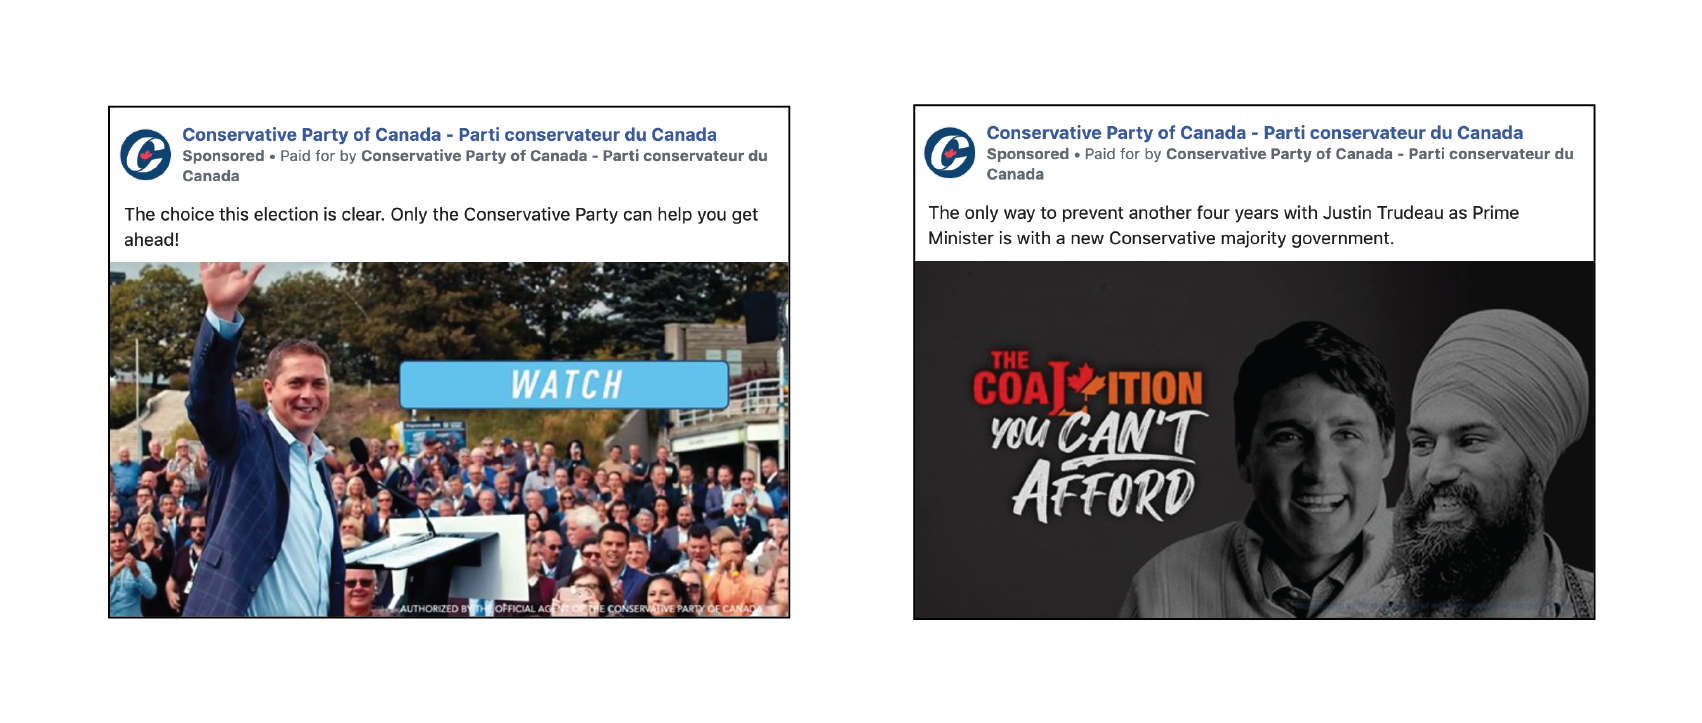 Conservative Party Facebook Ads